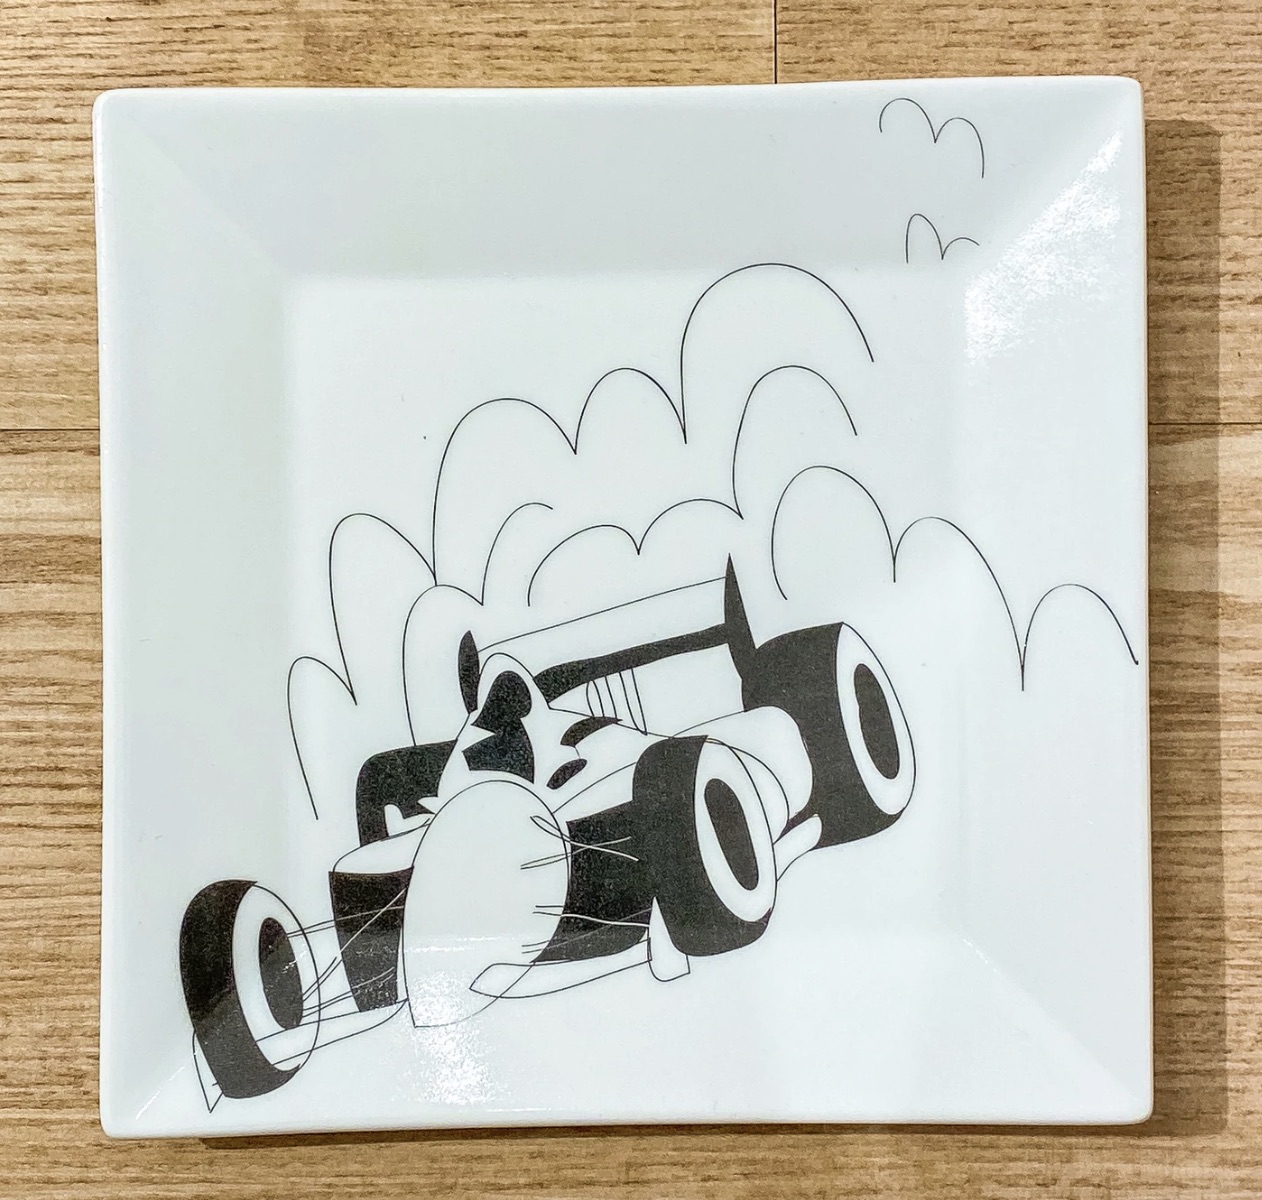 A porcelain plate with a race car printed on it